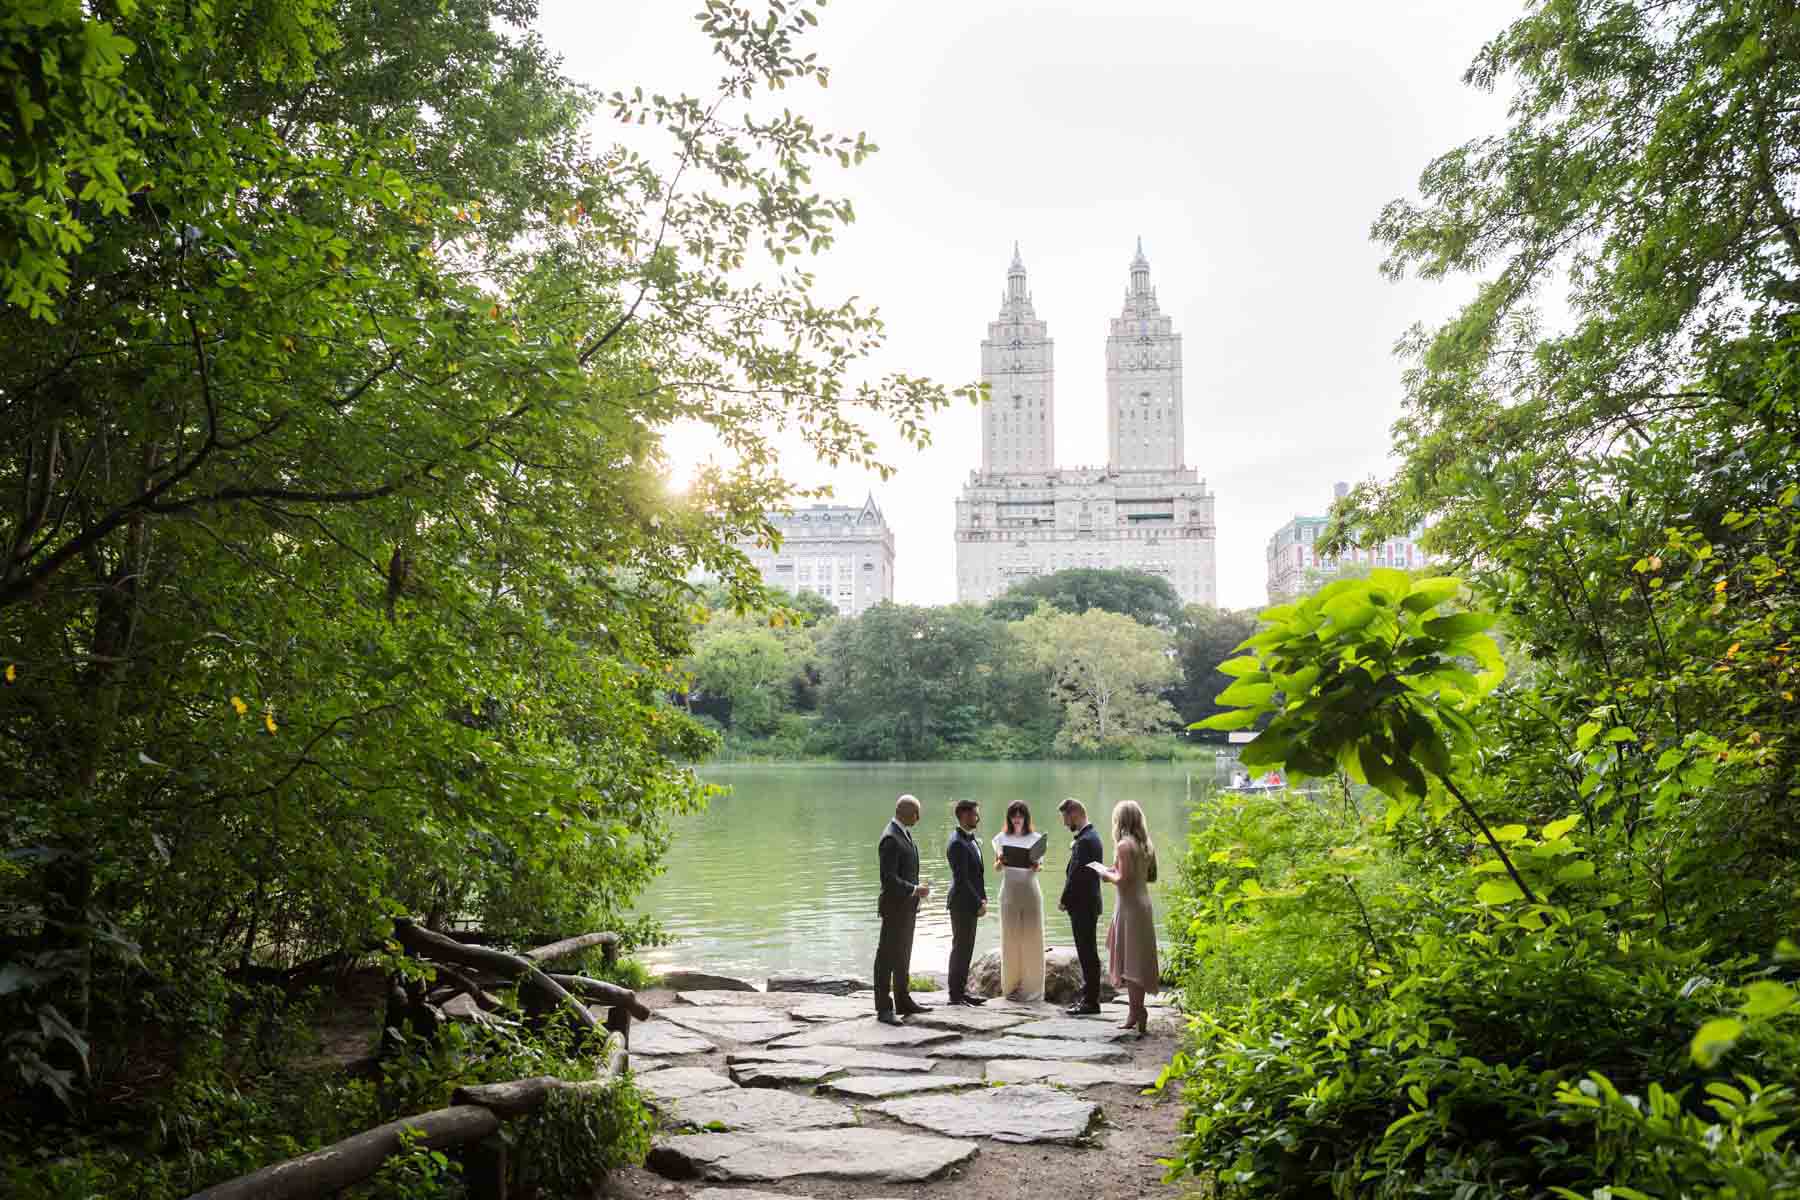 Wedding ceremony in Central Park for an article entitled, ‘Do you need a permit to get married in Central Park?’